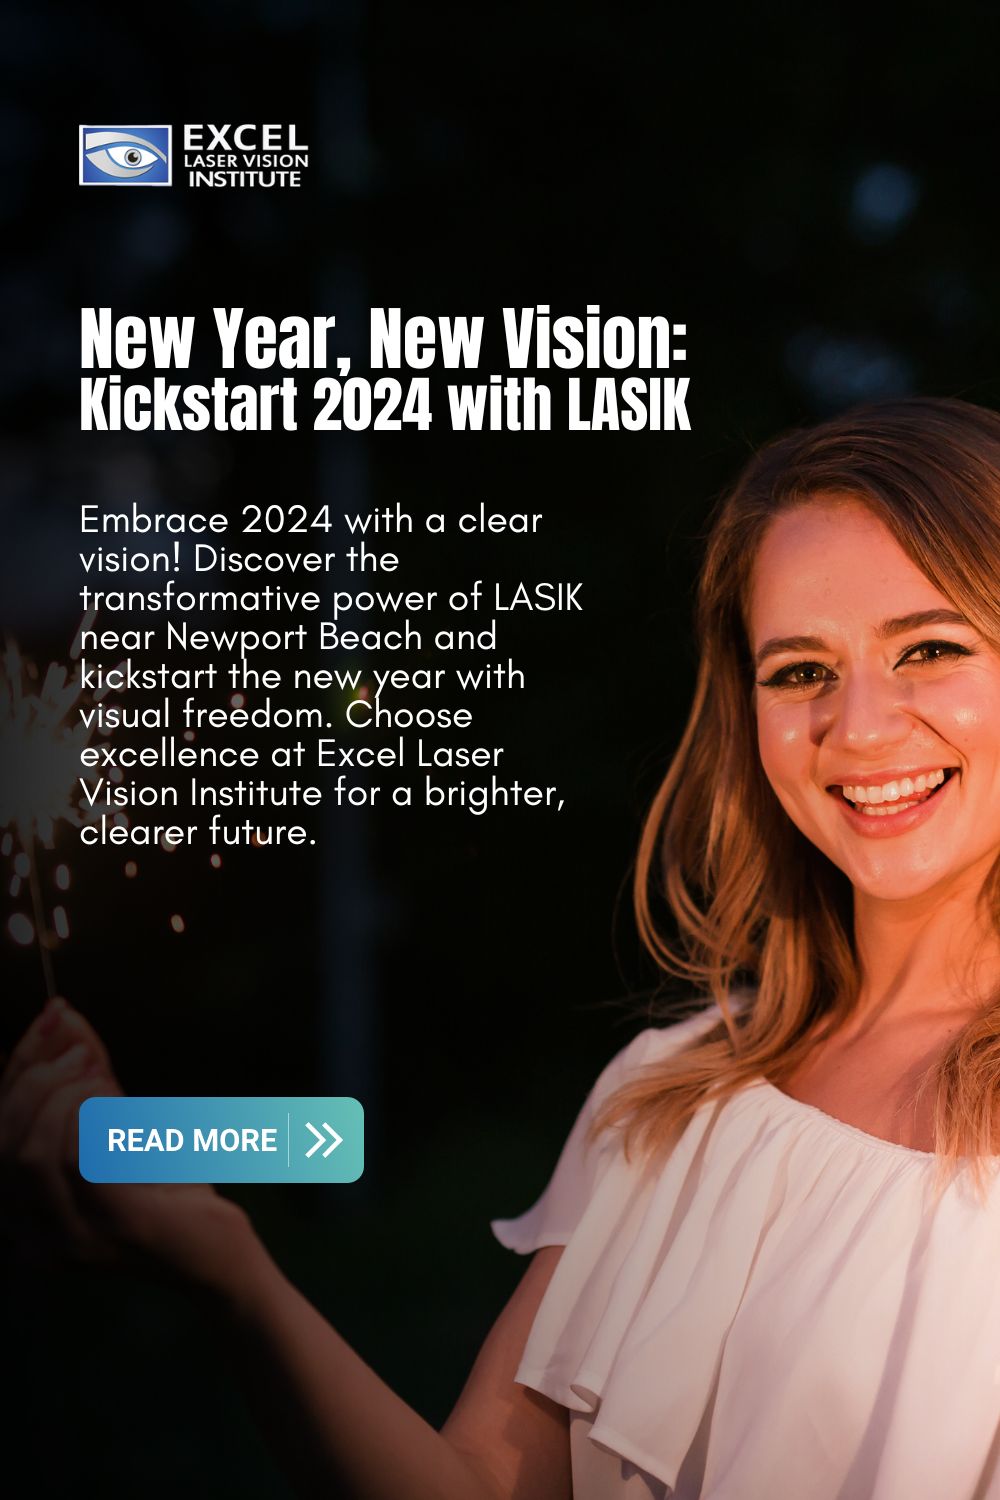 woman-holding-new-year-sparklers-blog-title-New-Year-New-Vision-Kickstart-2024-with-LASIK-Pinterest-Pin